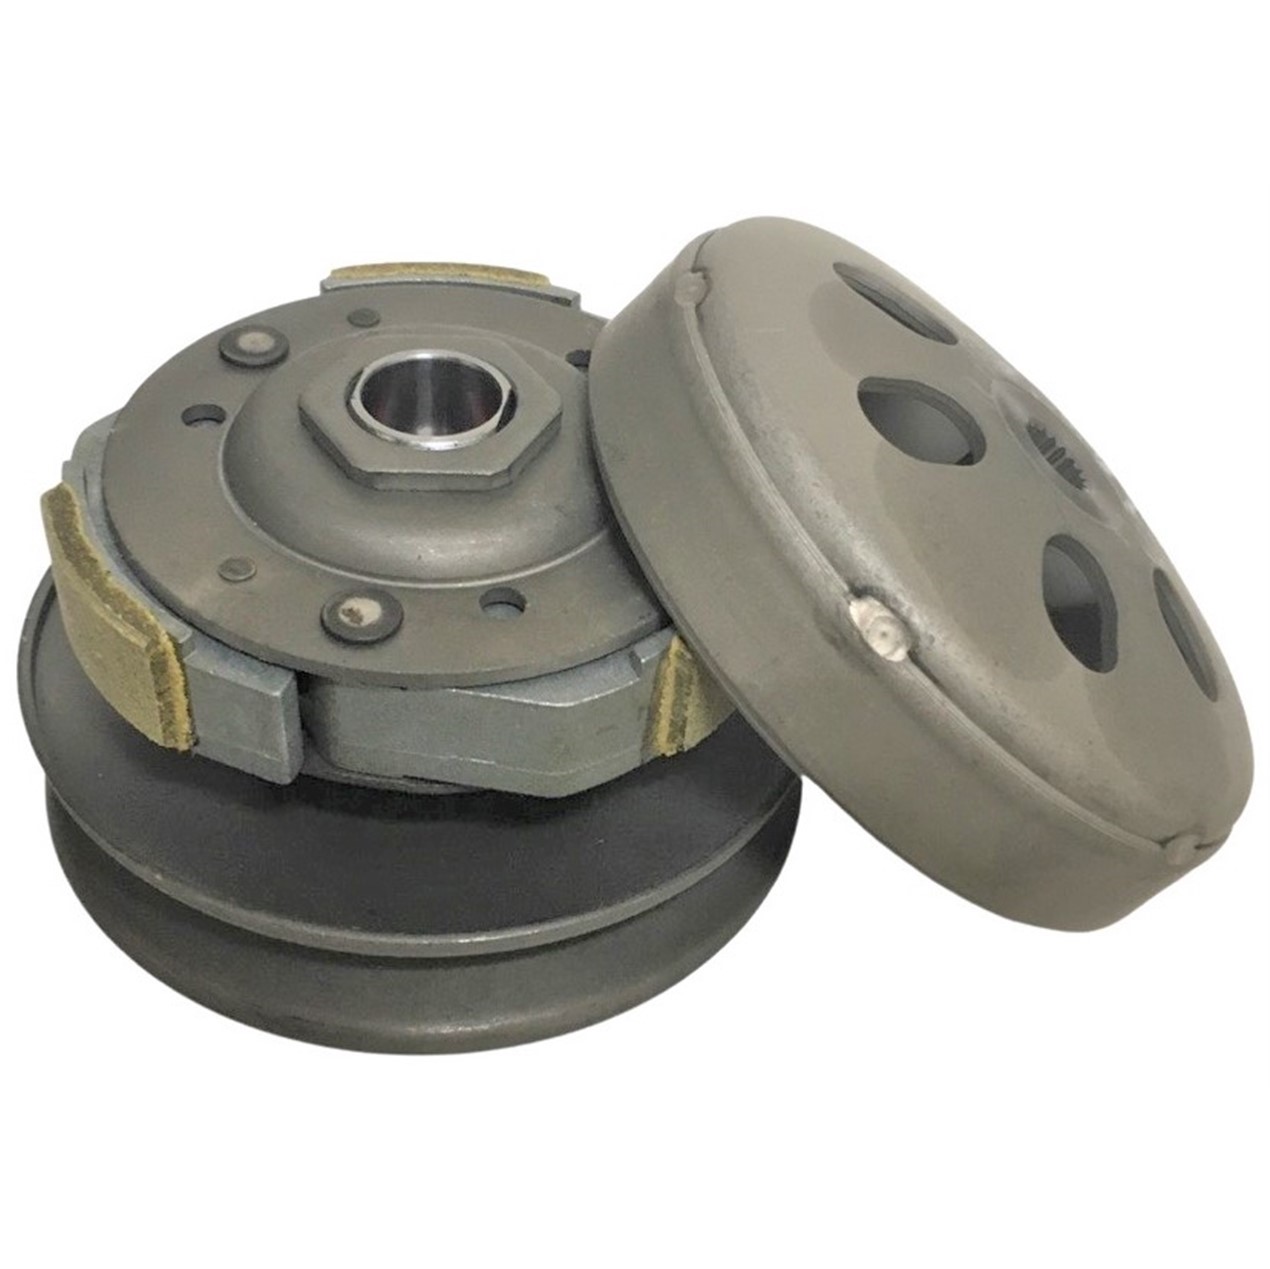 Rear Drive Clutch-Driven Pulley GY6-125, GY6-150 Chinese ATVs, GoKarts, Scooters Bell ID=125mm, Shaft =15mm, Splines=19 - Click Image to Close